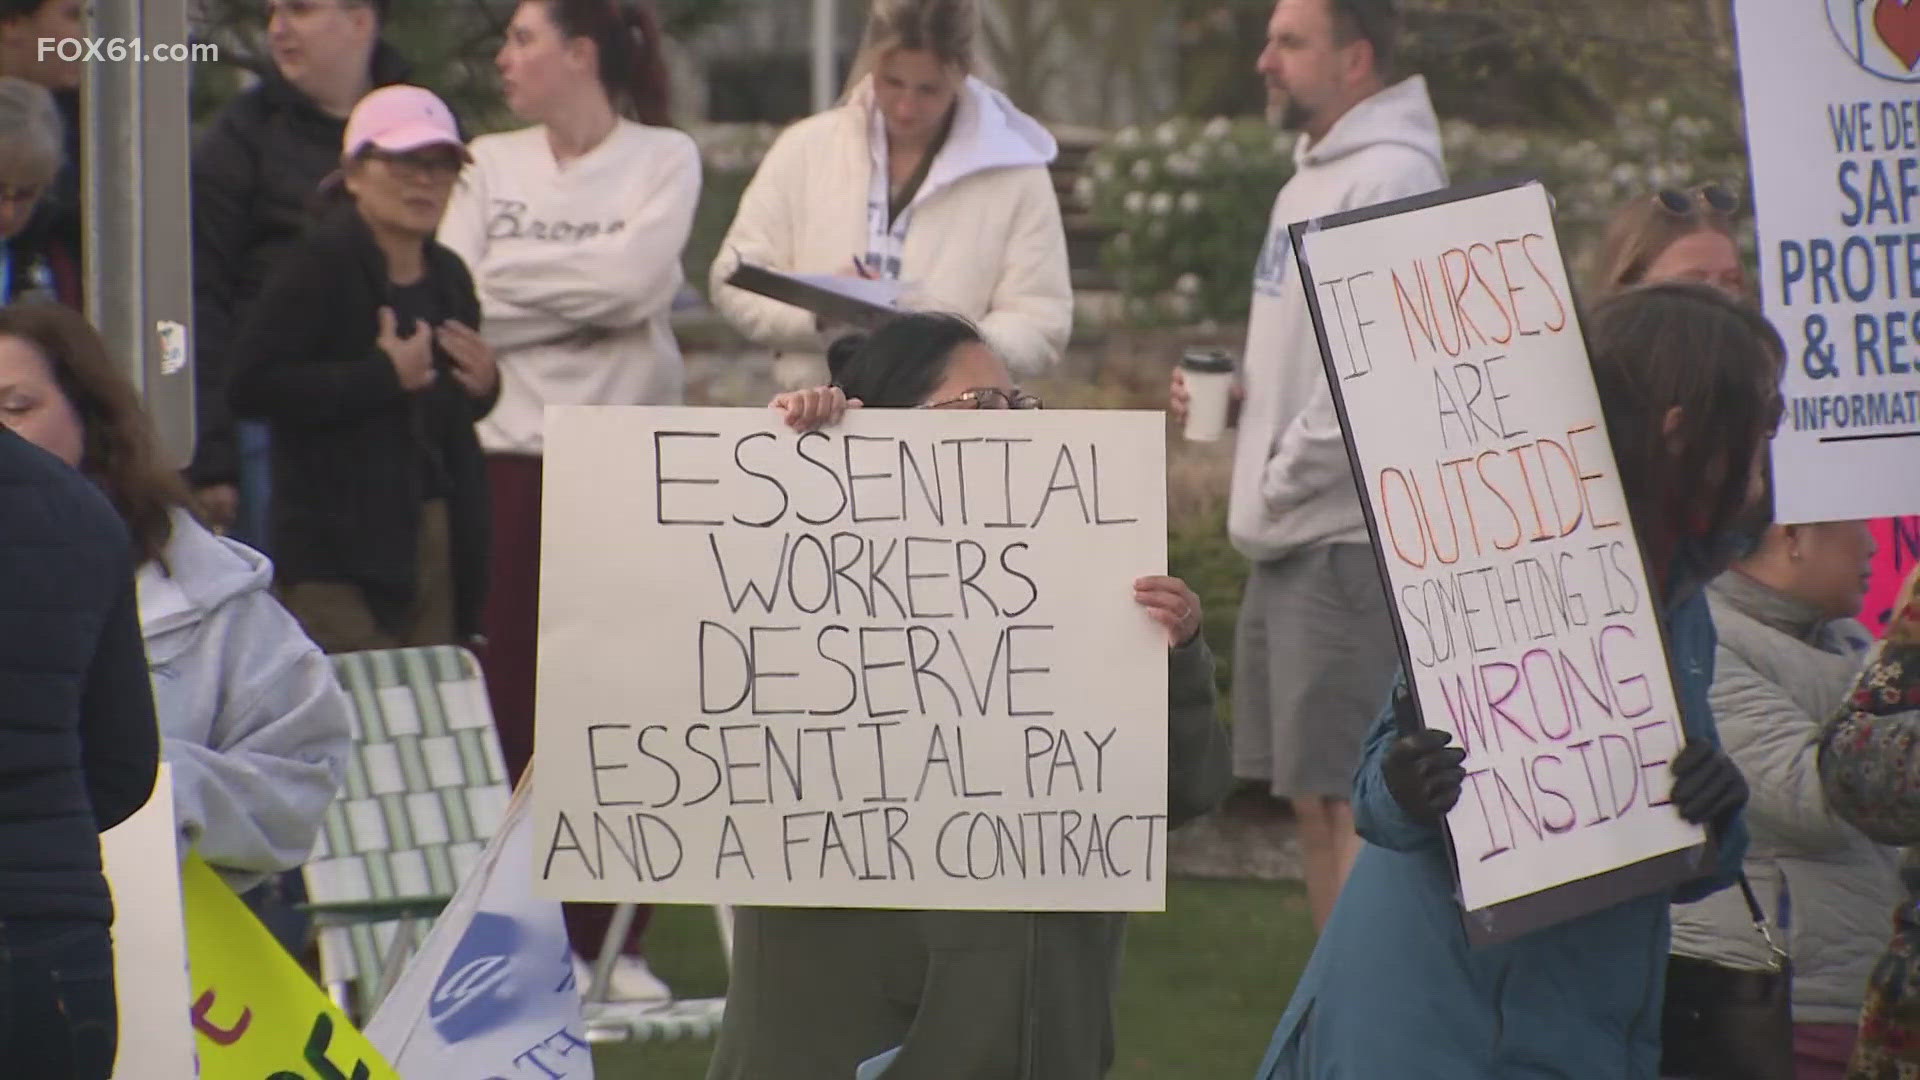 The nurses say essential workers deserve essential pay and a fair contract.